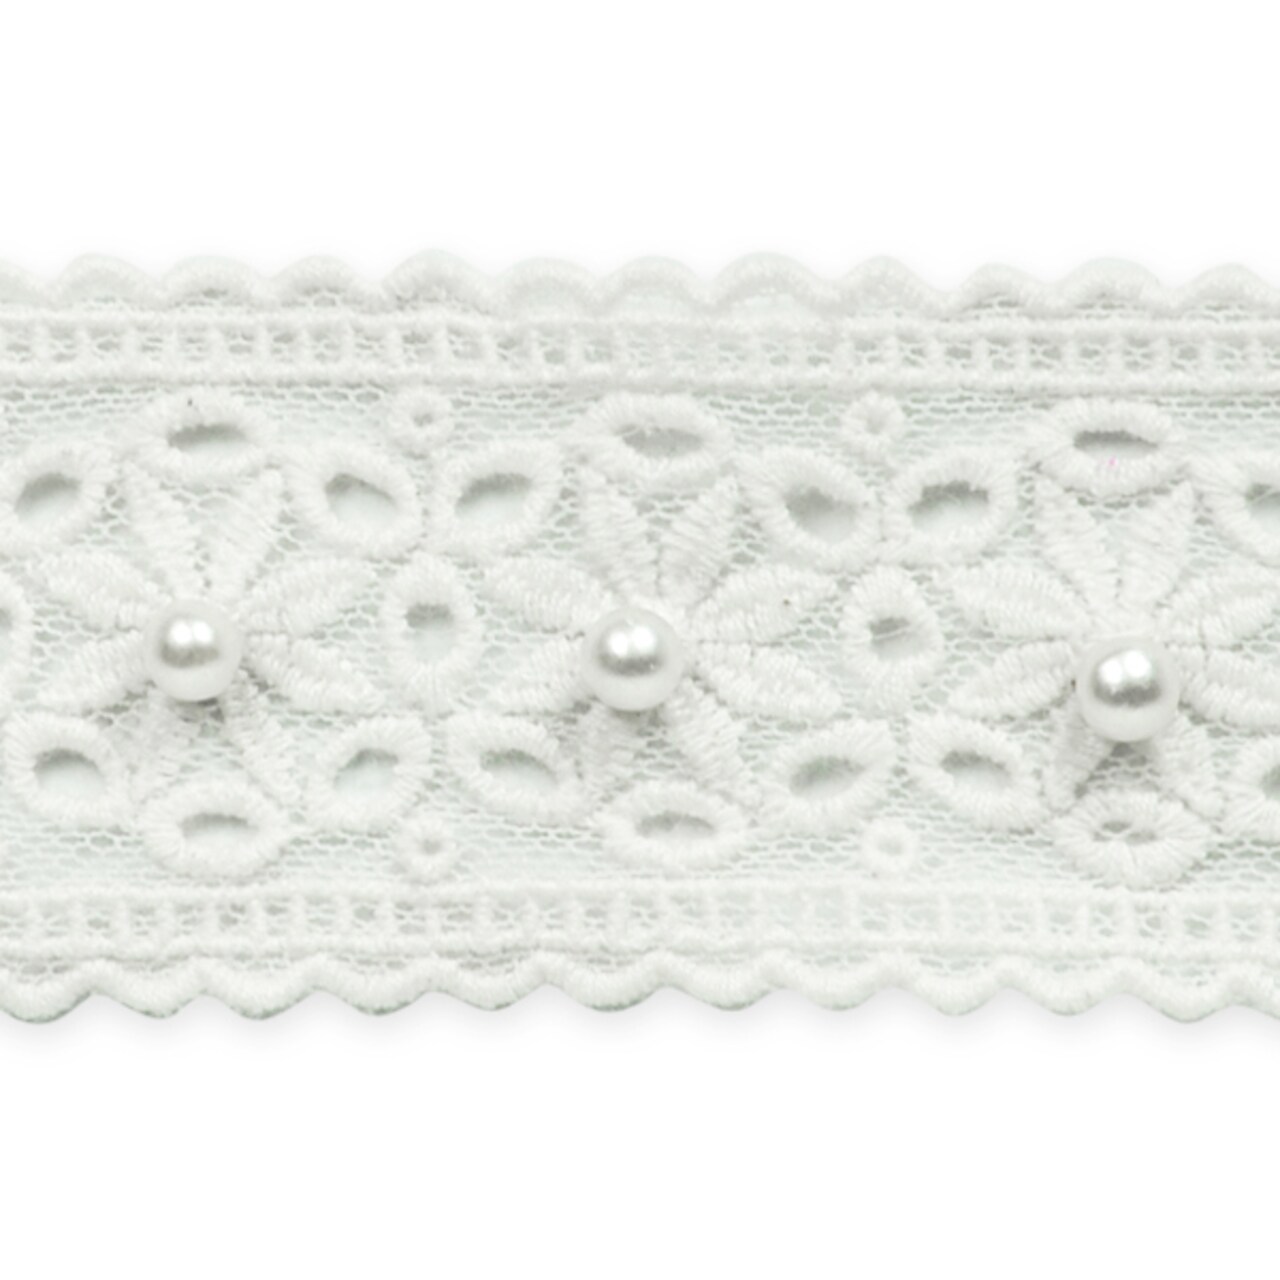 Vintage Bridal Daisy and Pearl Lace Trim